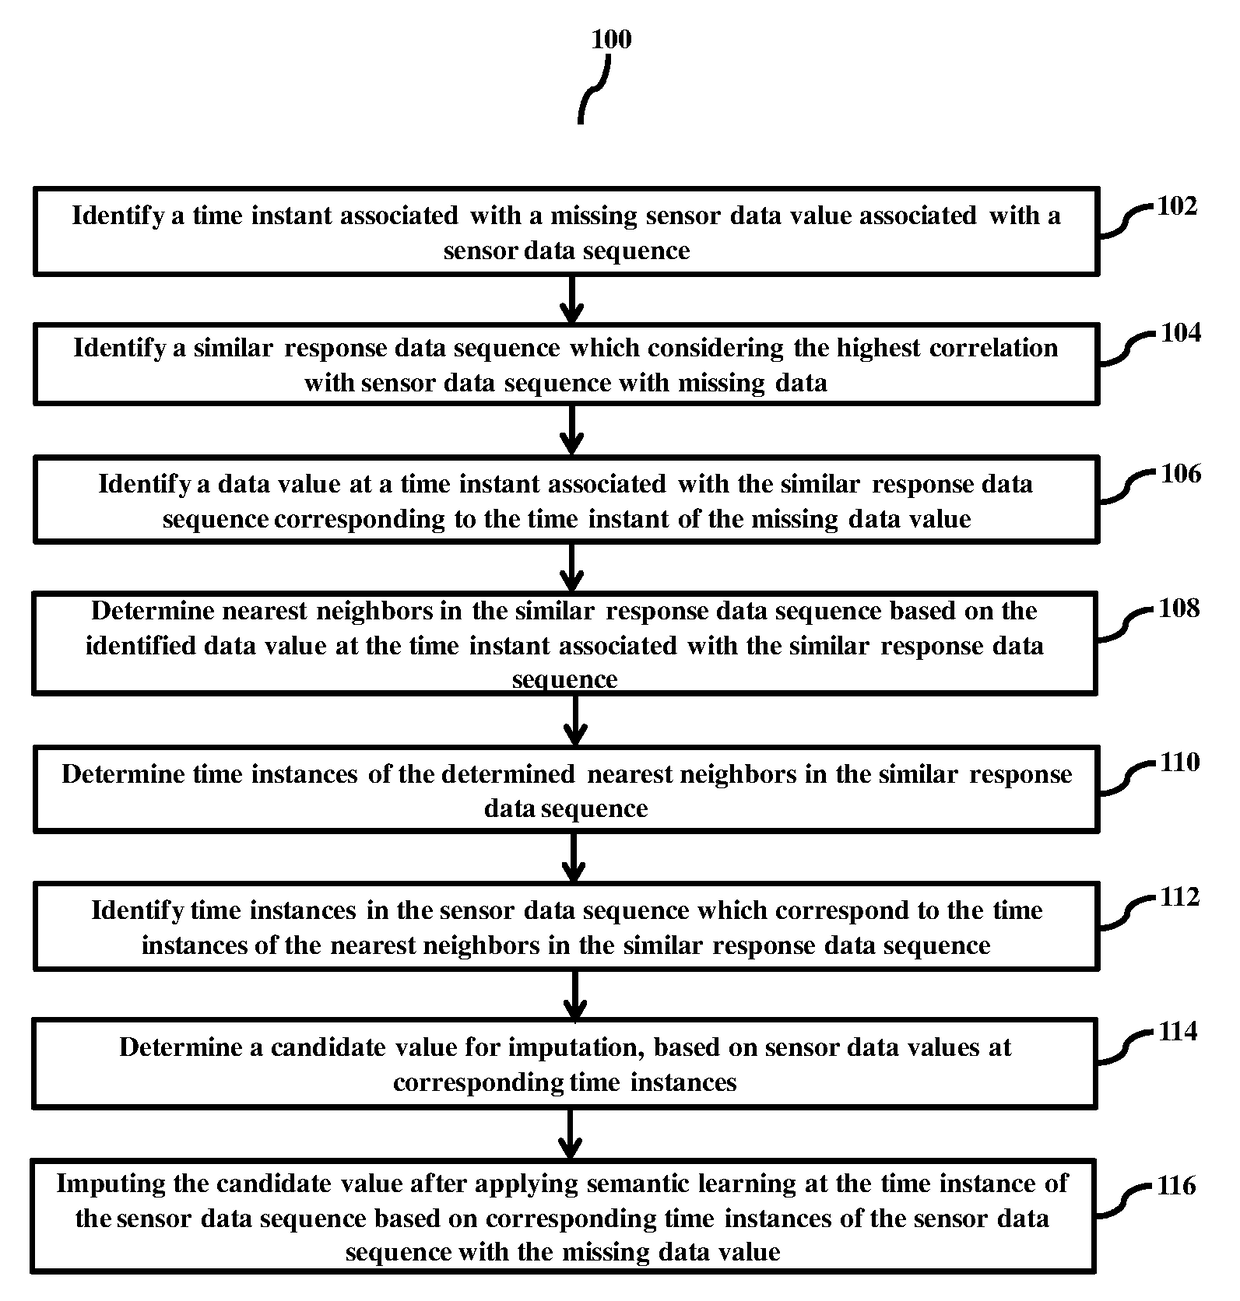 Method for imputing missed data in sensor data sequence with missing data